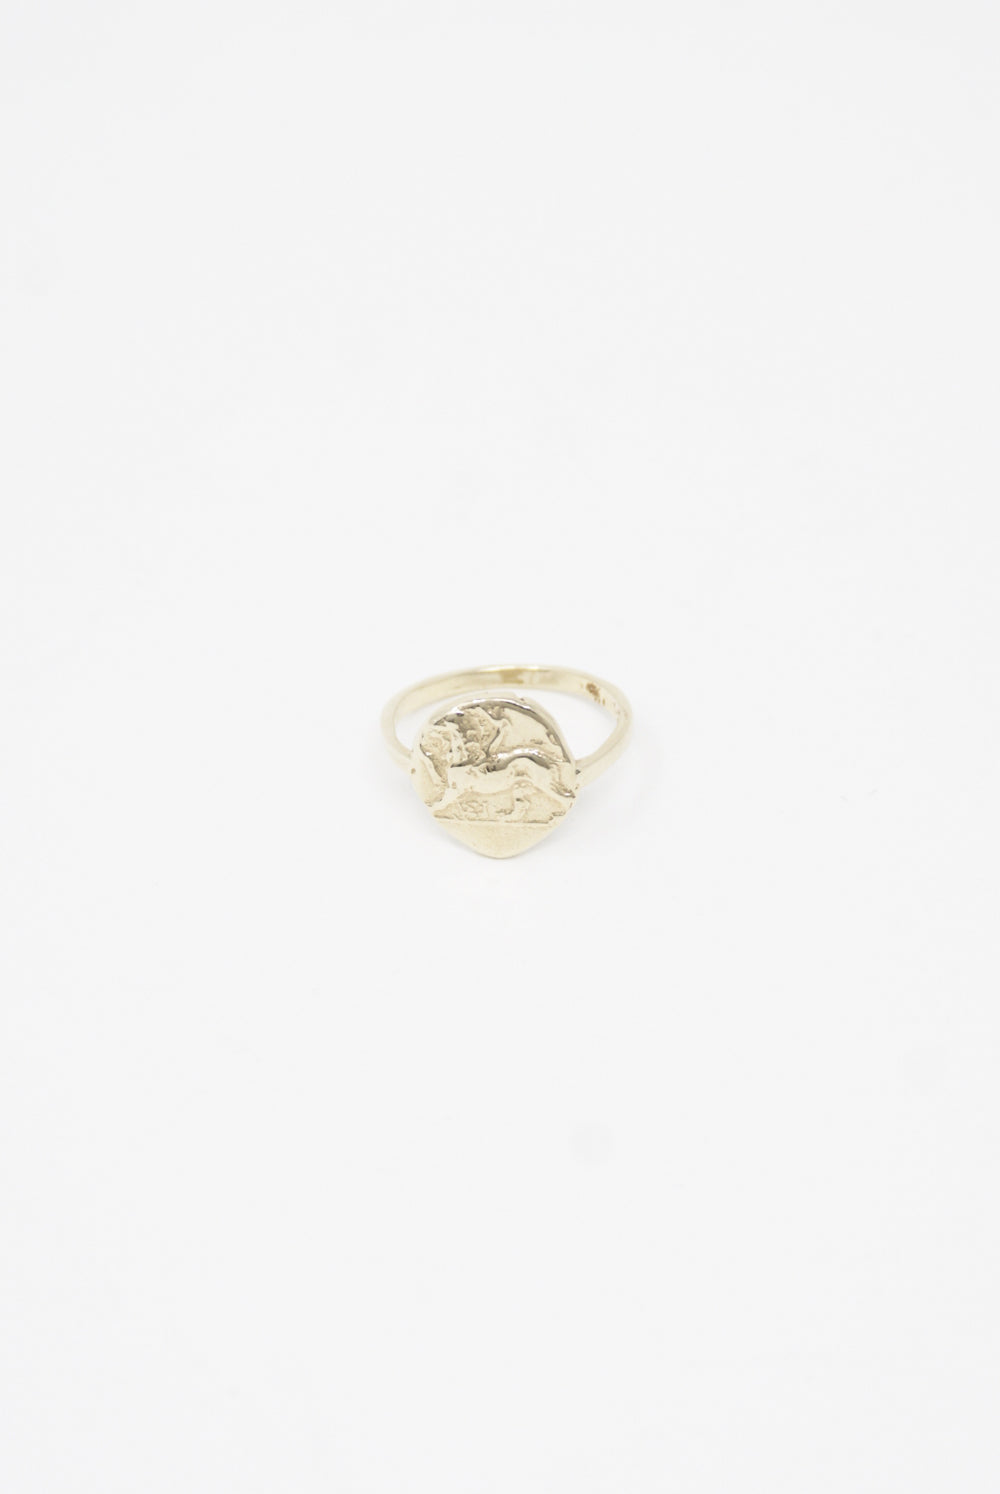 Kathryn Bentley Coin Ring in Chimera